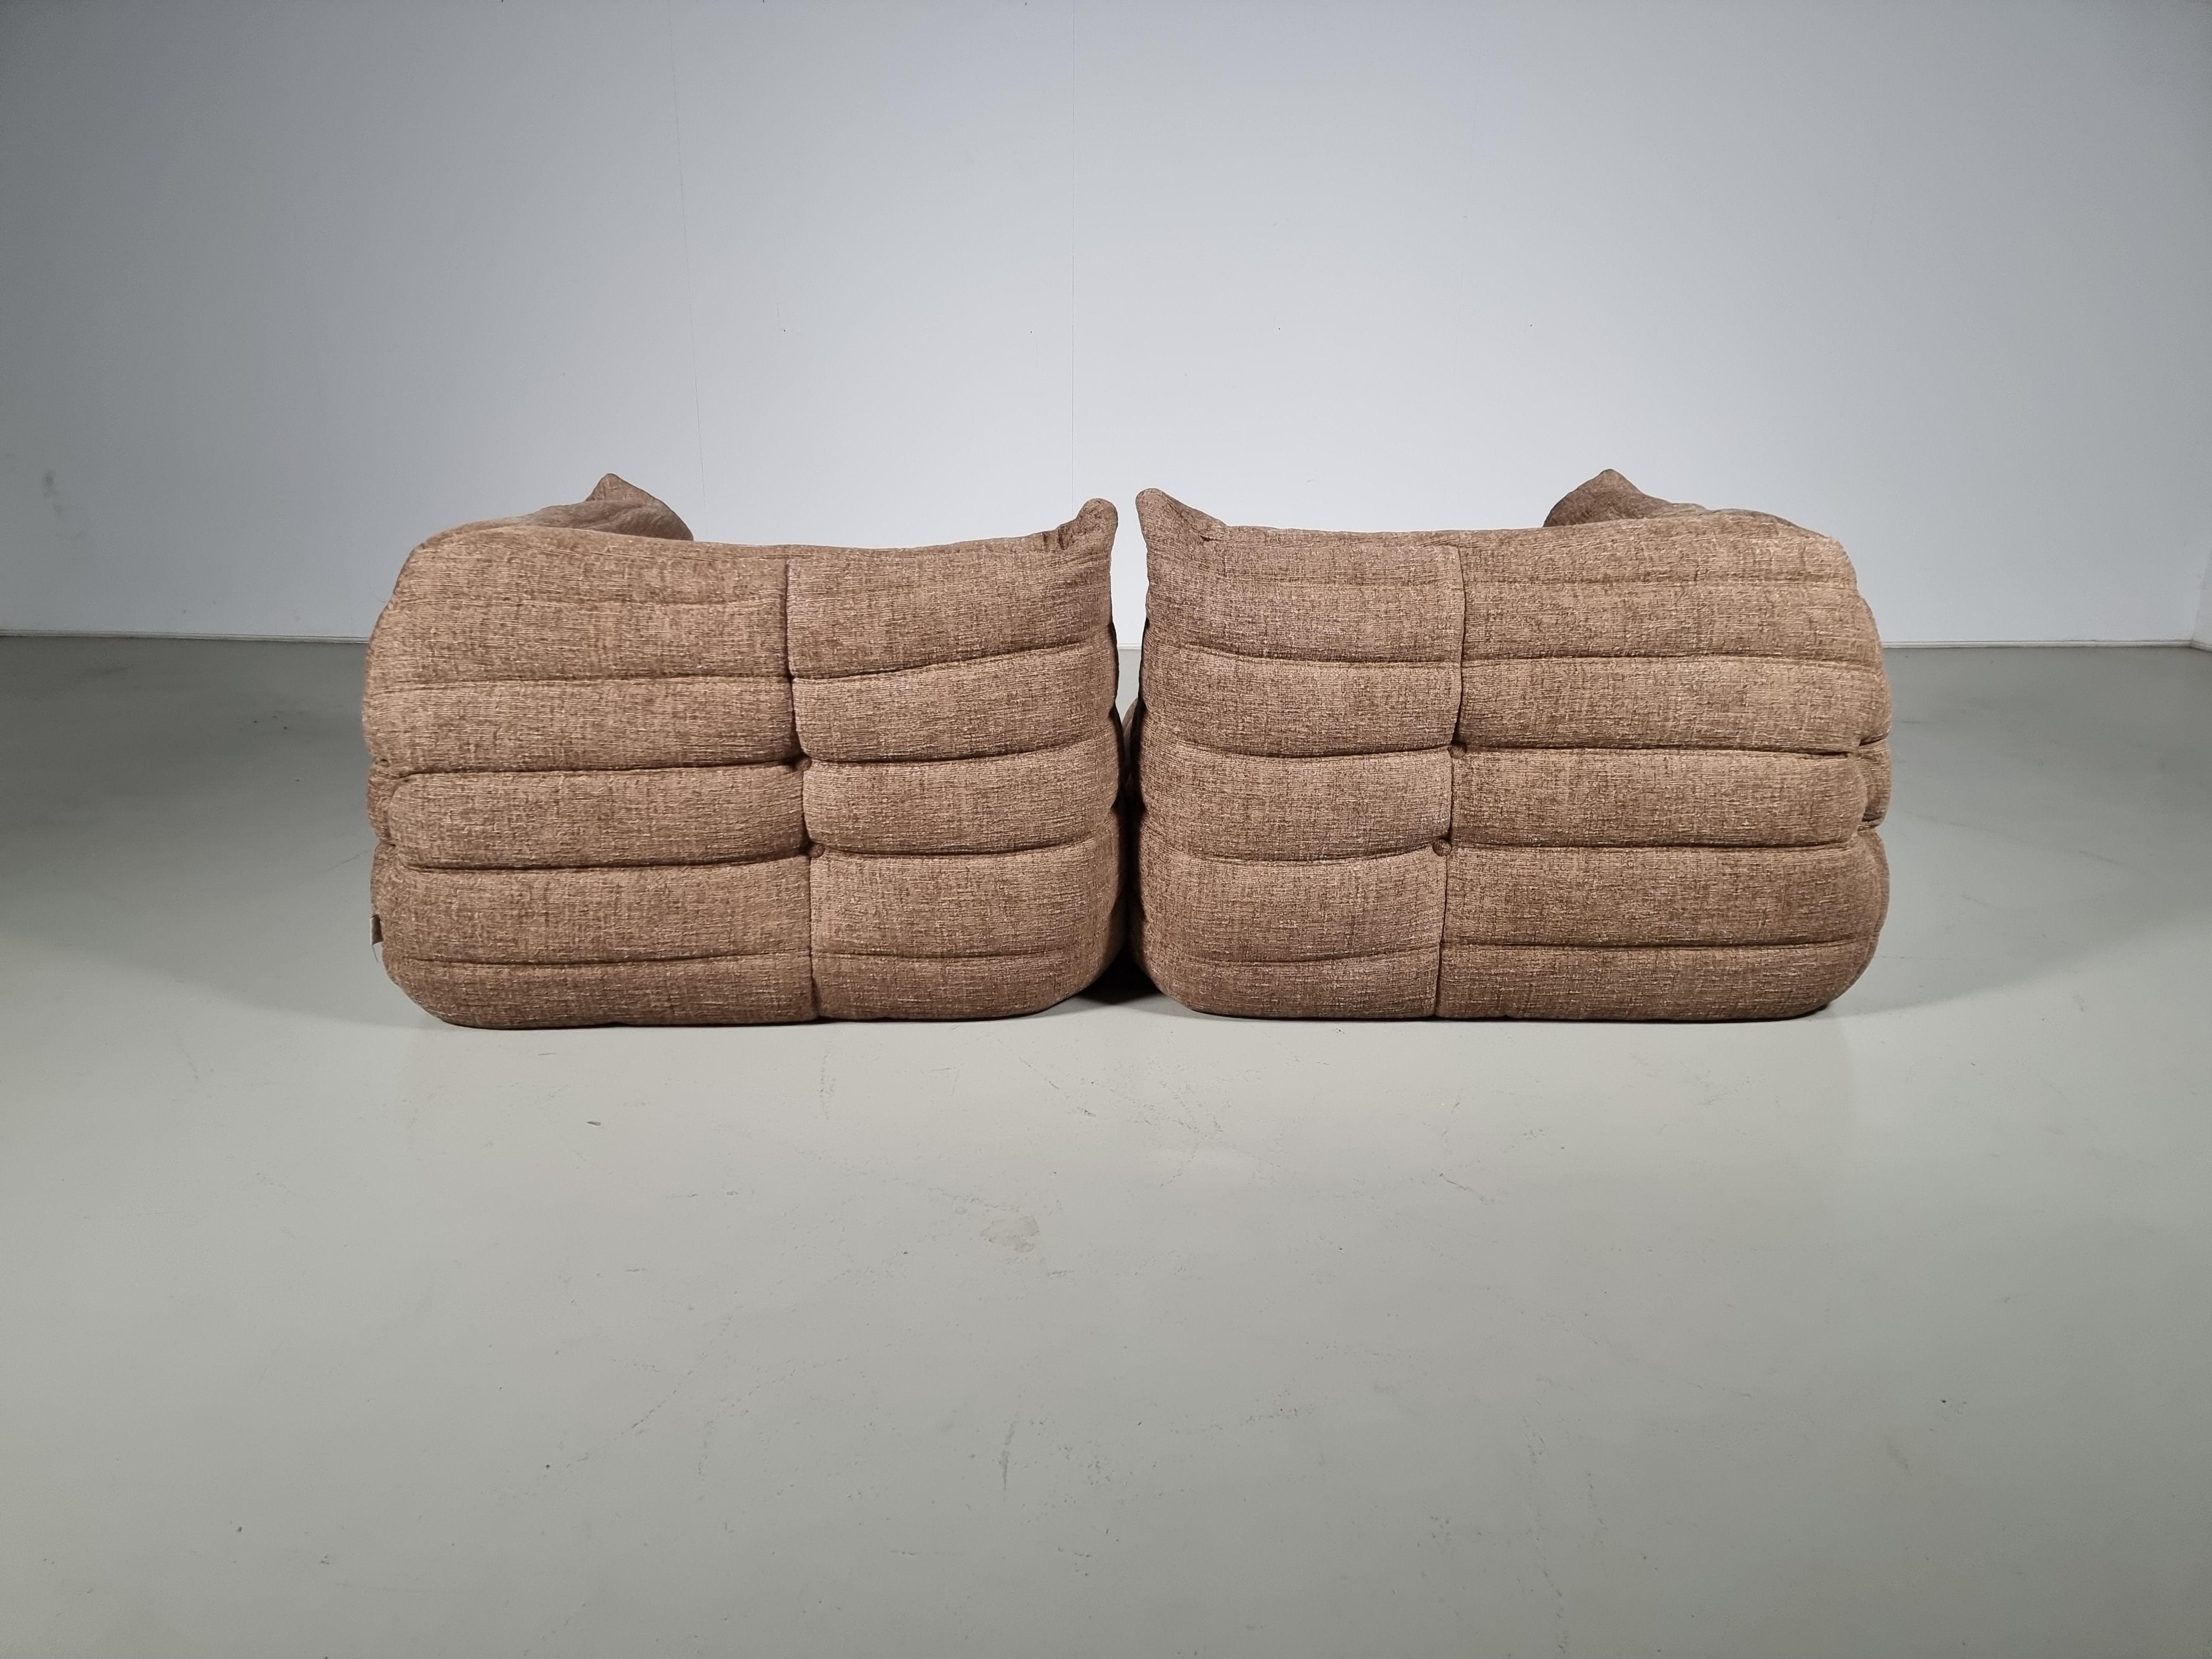 Togo lounge chairs designed by Michel Ducaroy in the 1970s for Ligne Roset.
It shows a nice warm natural color tone and its famous wrinkled cozy design.
Lined underneath with original fabric. Reupholstered in a high-quality textured fabric by Zinc